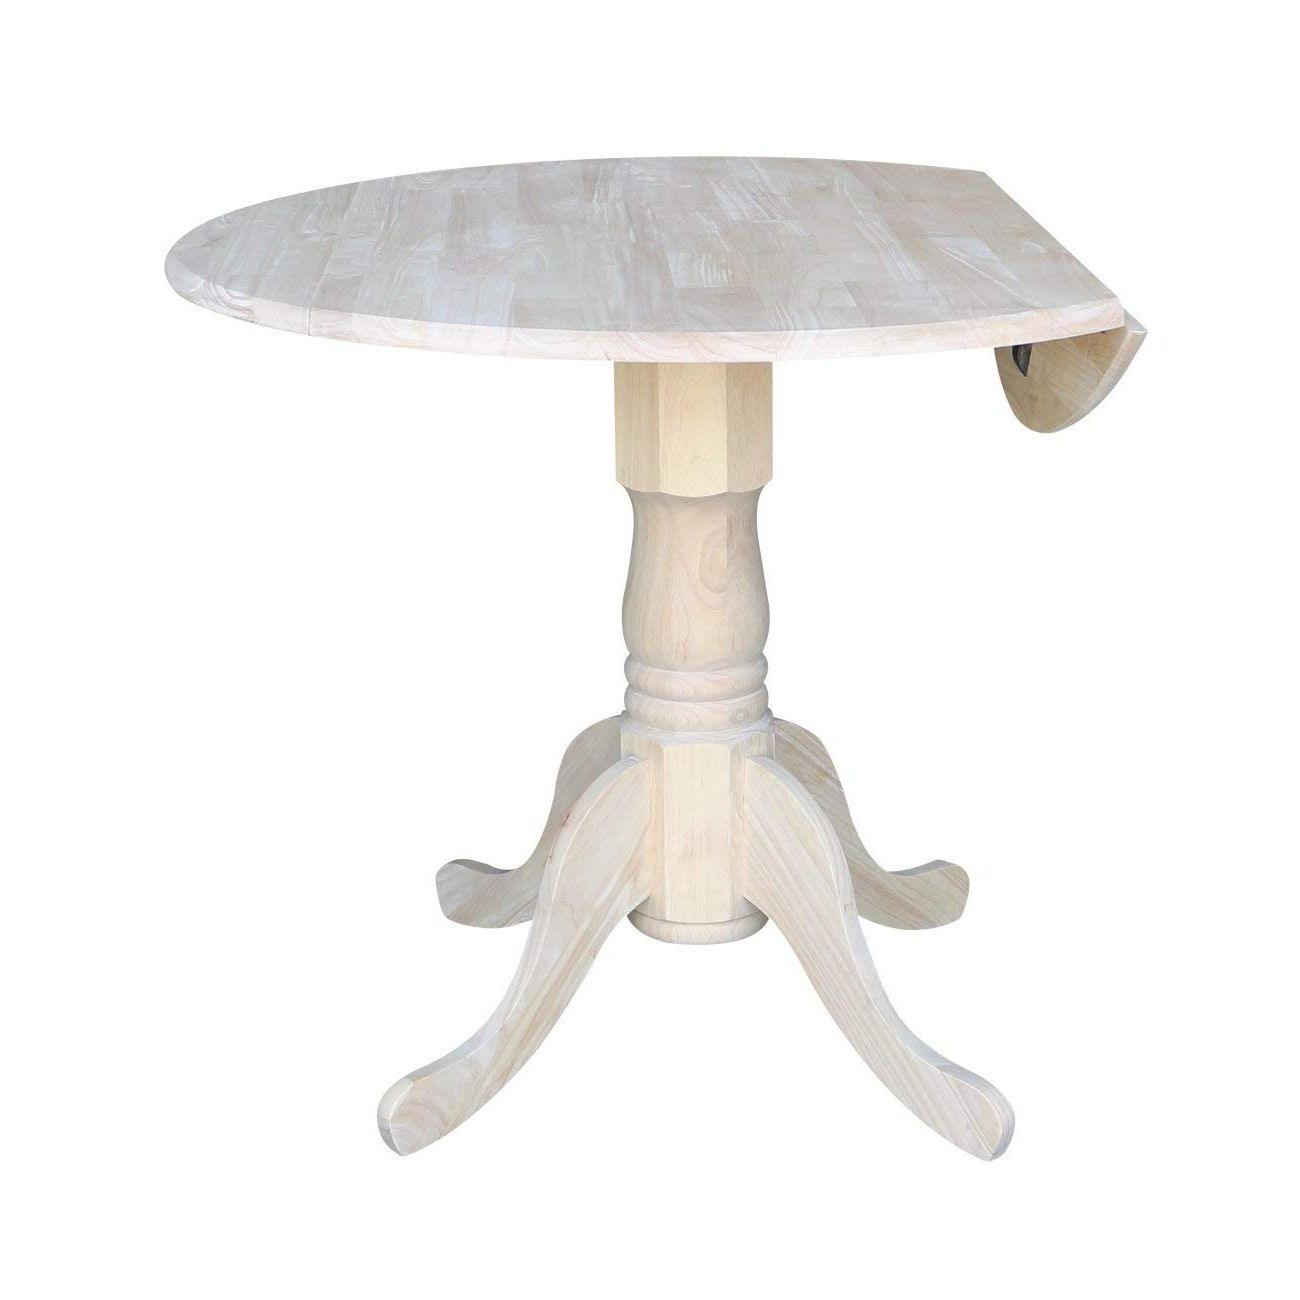 2019 Cheap Primitive Dining Room, Find Primitive Dining Room Throughout Aztec Round Pedestal Dining Tables (View 25 of 25)